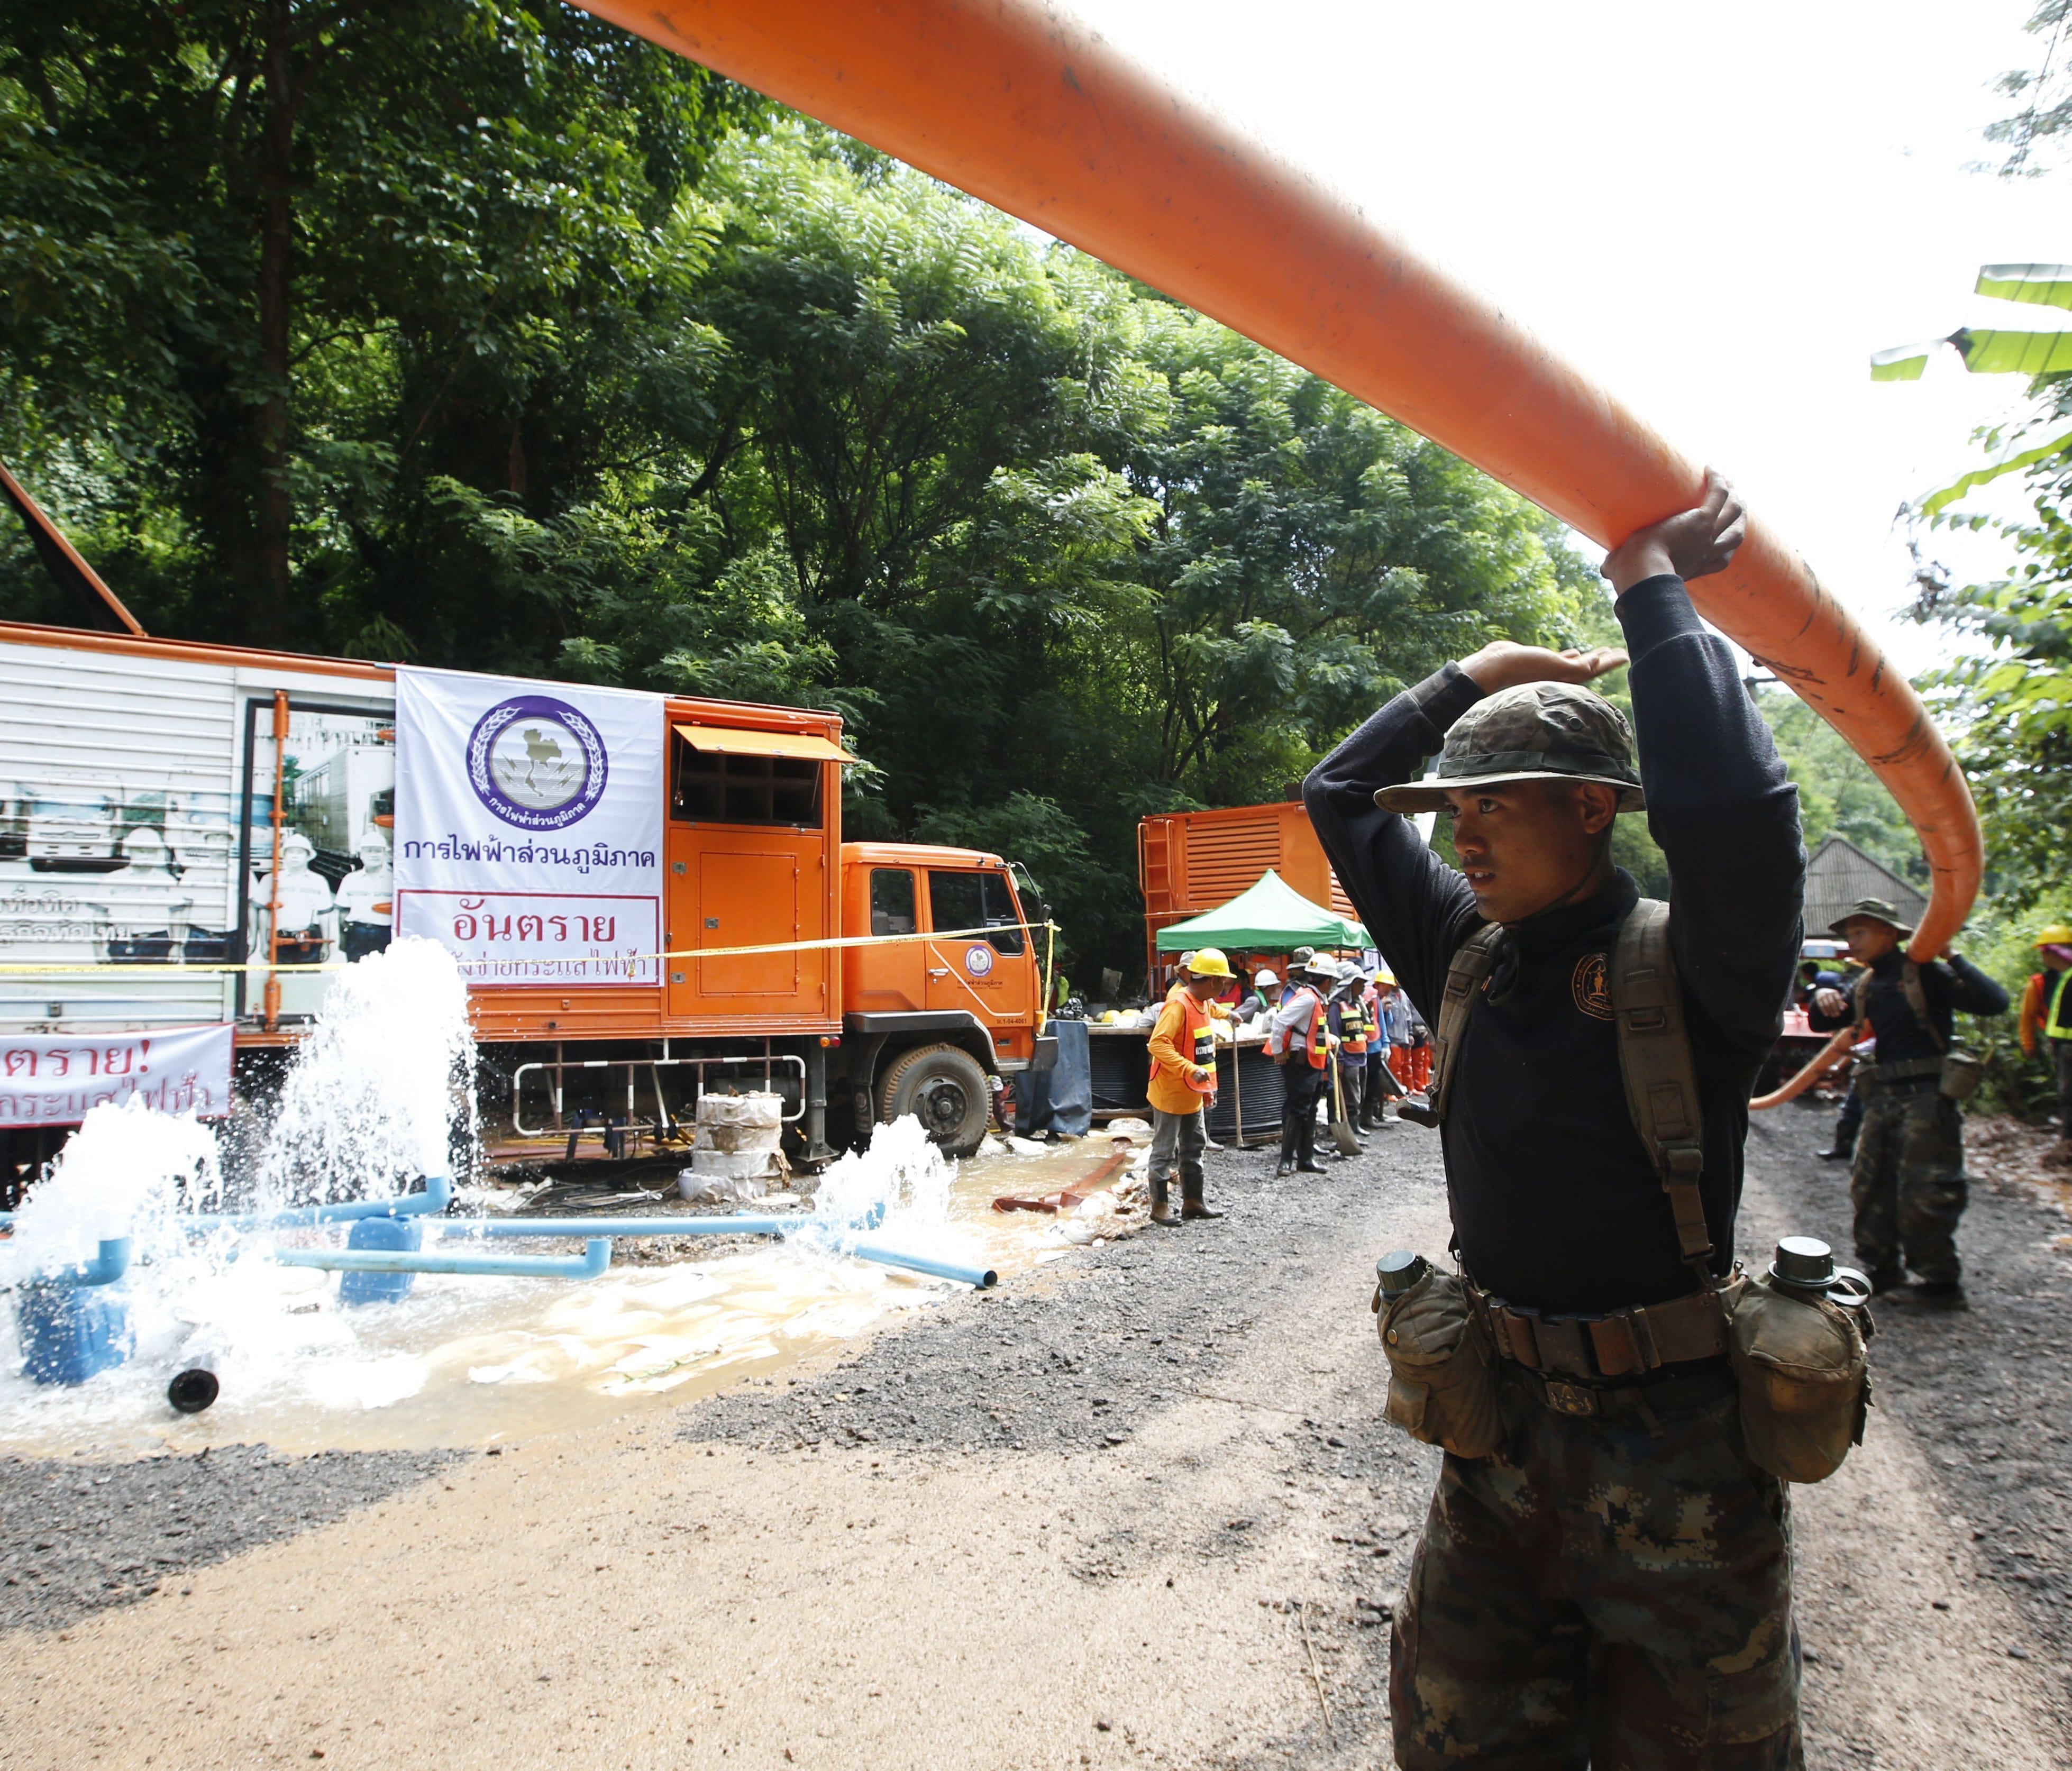 Thai soldiers carry drainpipe while heading to the cave during the ongoing rescue operations for the child soccer team and their assistant coach, at Tham Luang cave in Khun Nam Nang Non Forest Park, Chiang Rai province, Thailand, July 4, 2018.